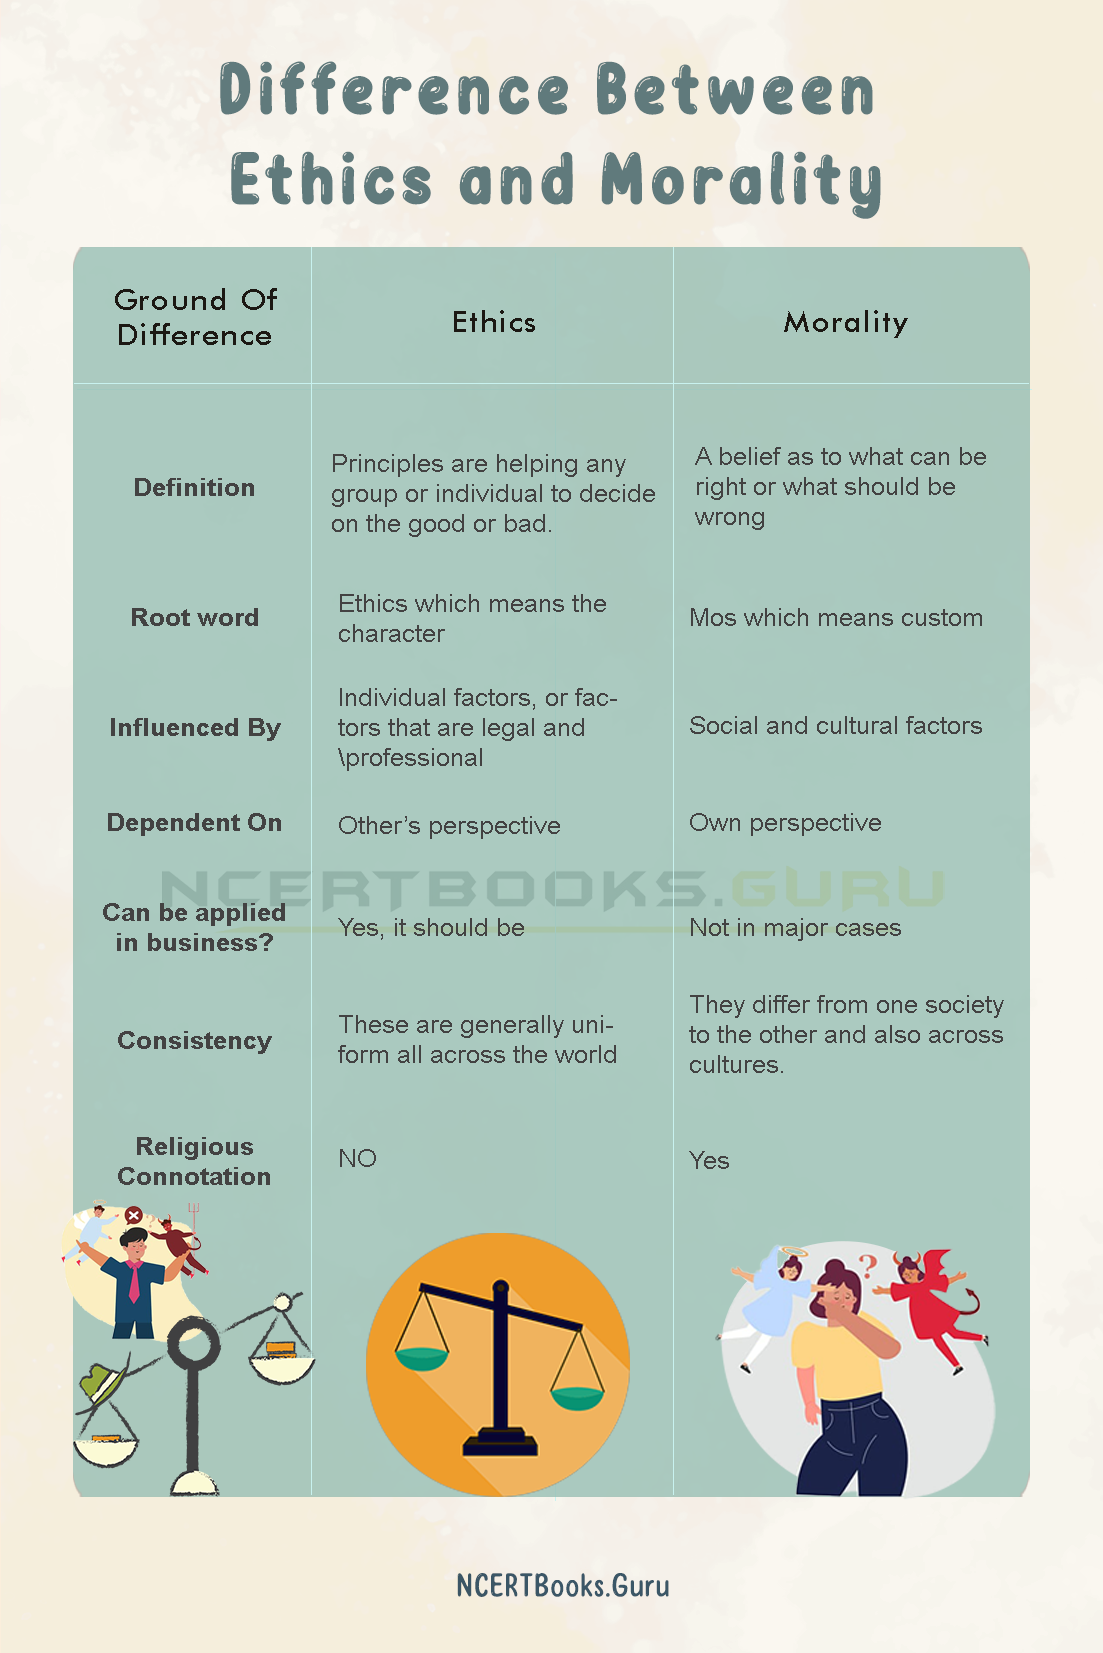 Difference Between Ethics and Morality 2